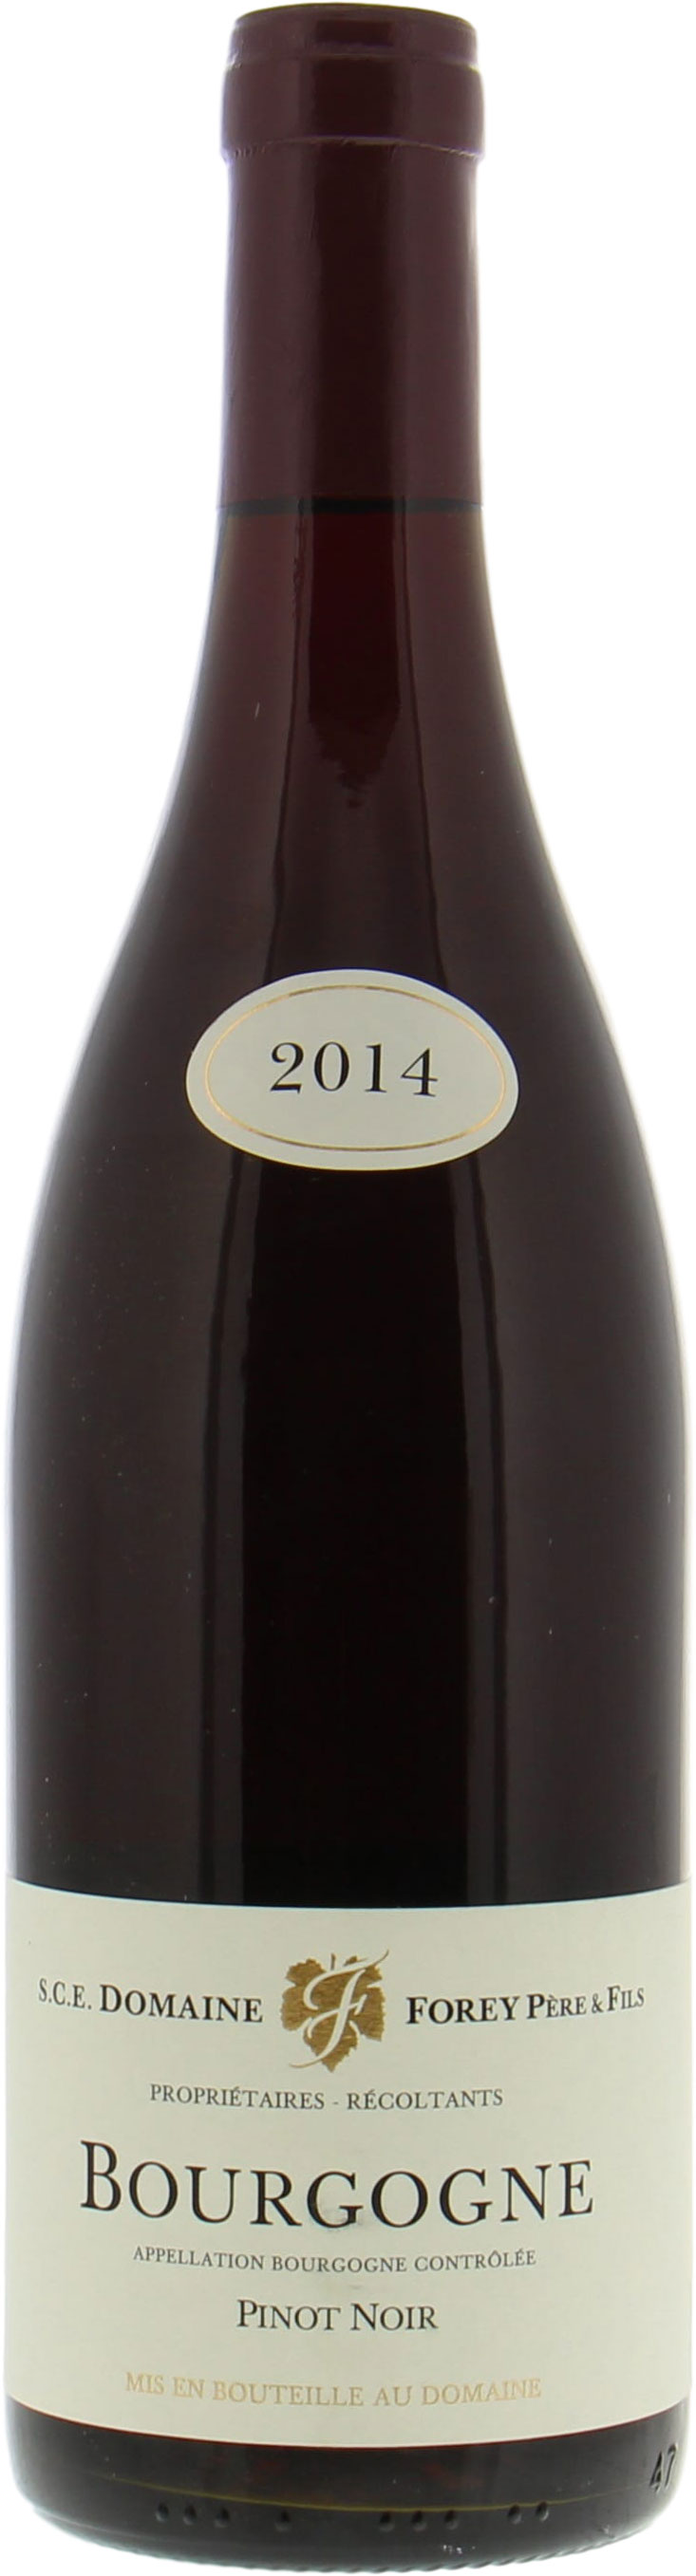 Domaine Forey Pere & Fils - Bourgogne Pinot Noir 2014 Perfect